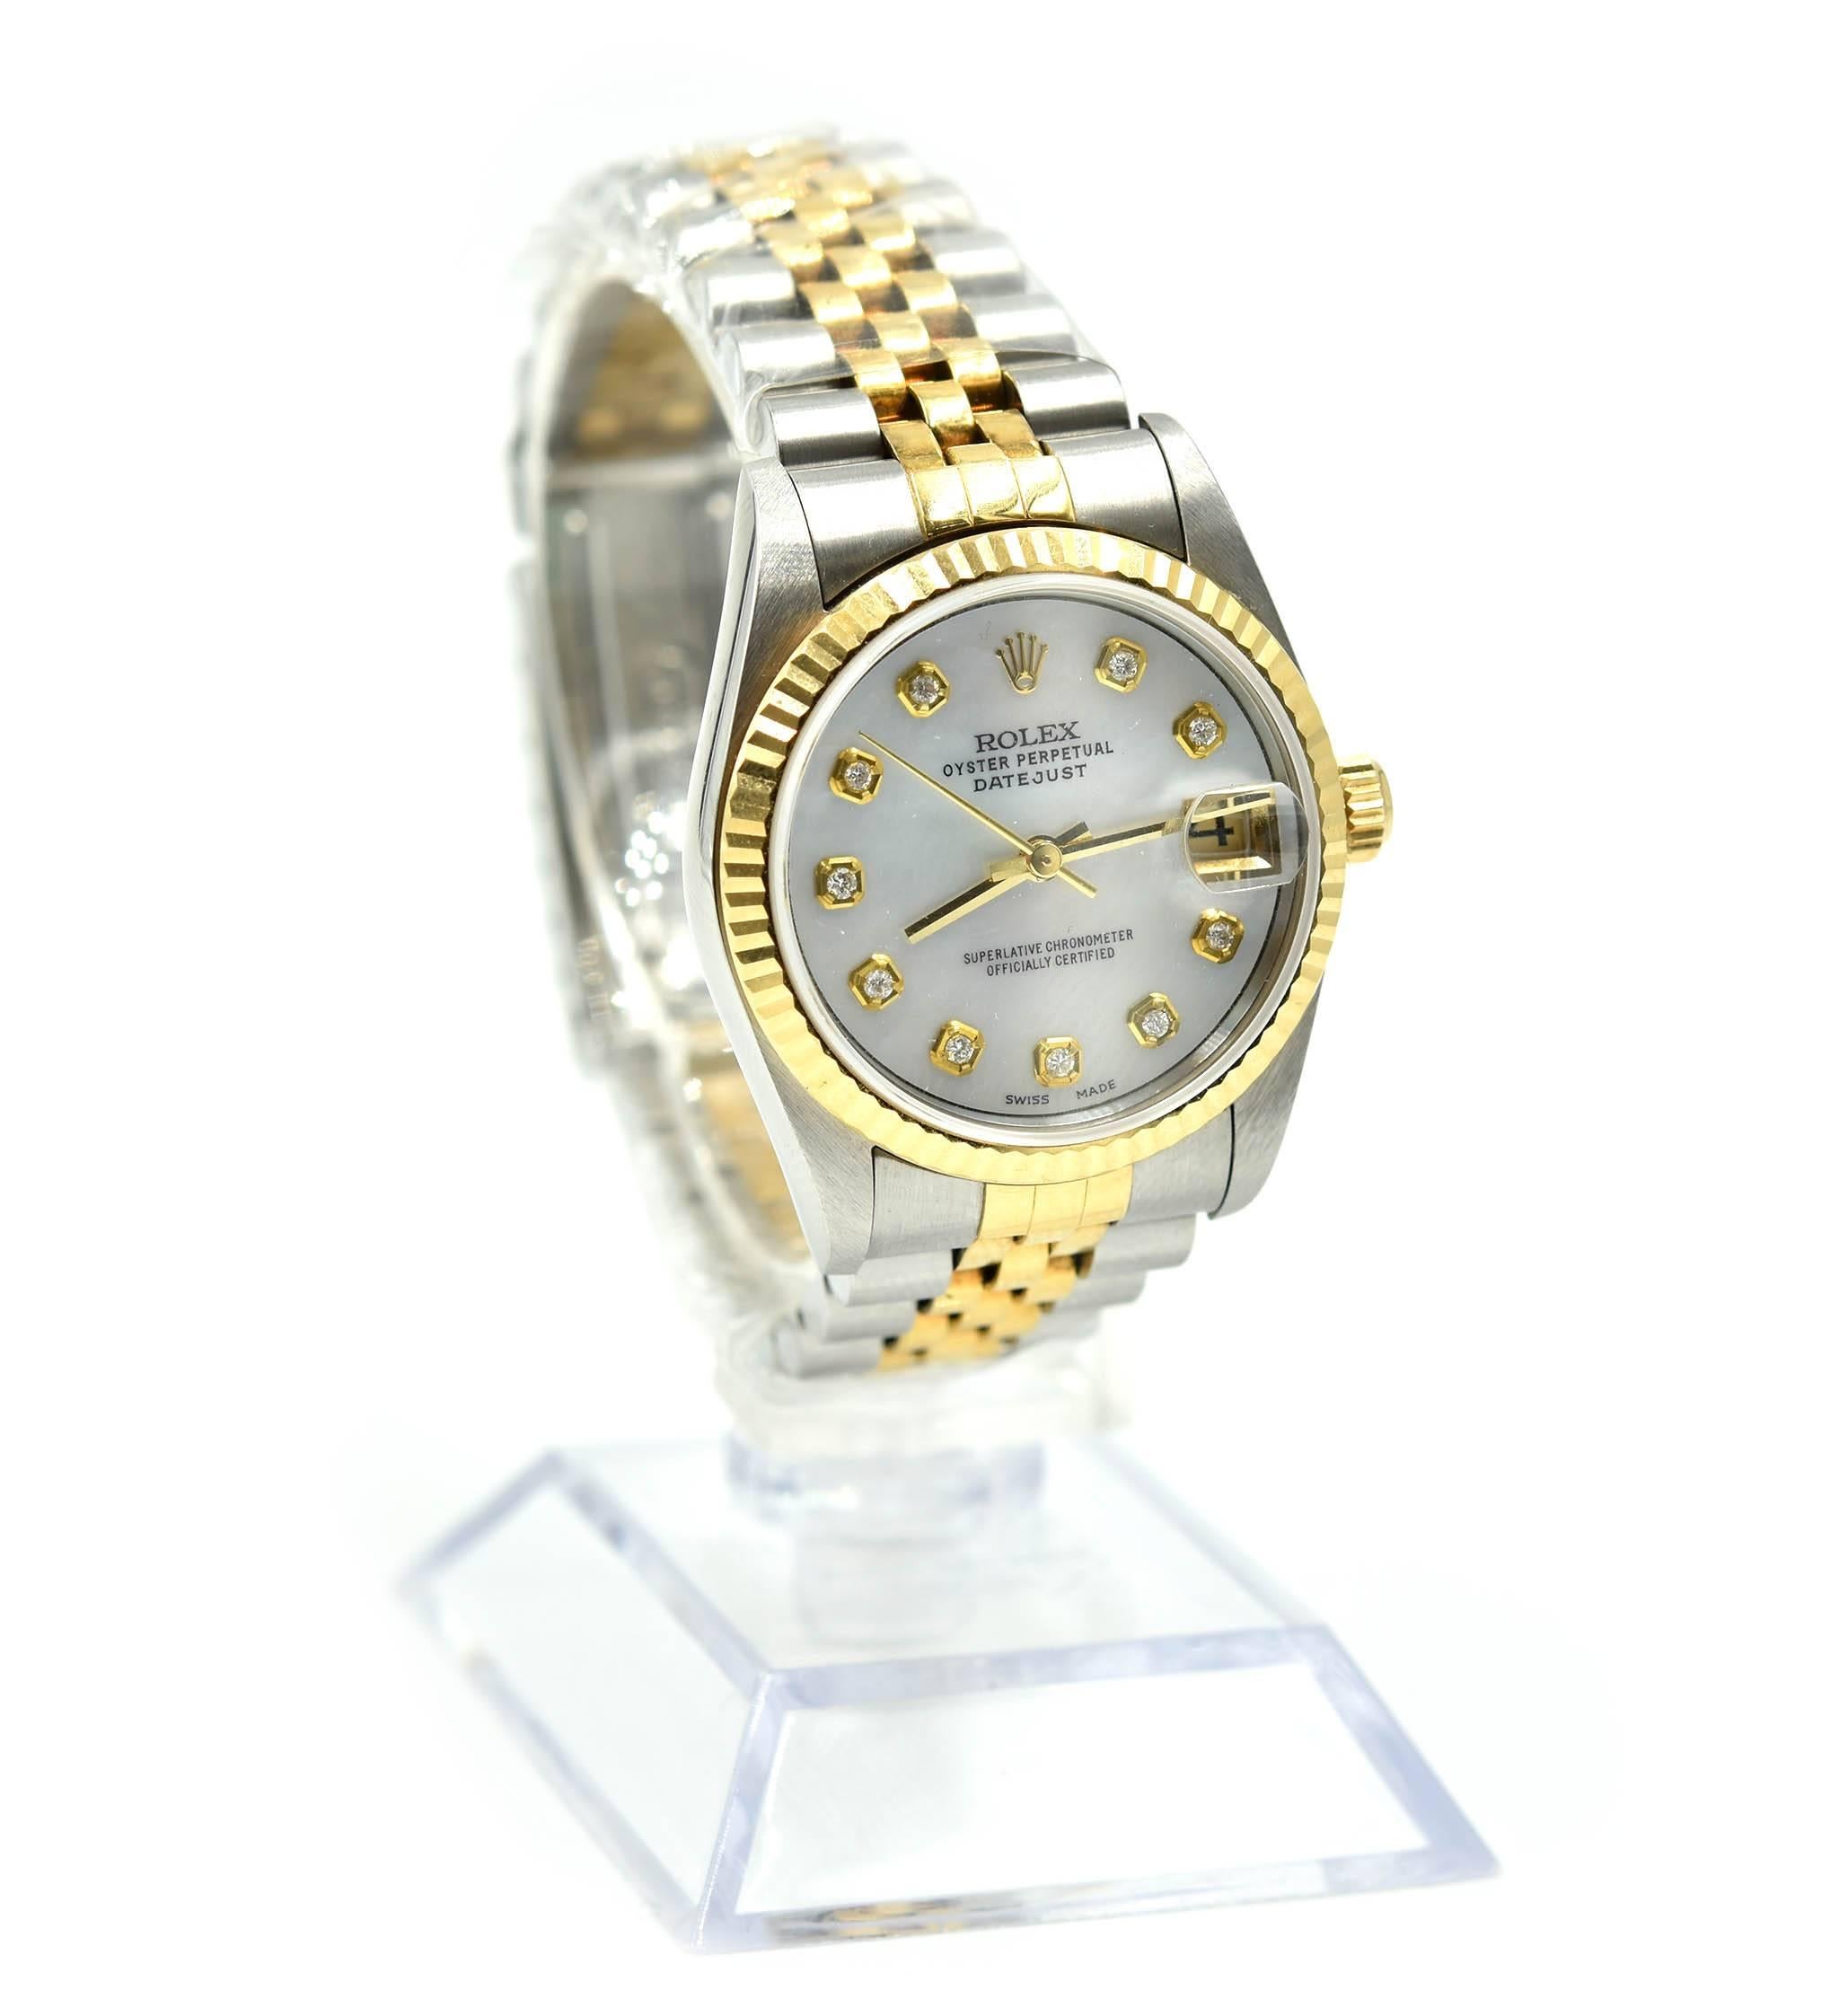 Movement: automatic
Function: hours, minutes, sweep seconds, date
Case: 31mm stainless steel case with 18k yellow gold bezel, sapphire protective crystal, date bubble at 3 o’clock, screw-down crown
Band: stainless steel and 18k yellow gold jubilee